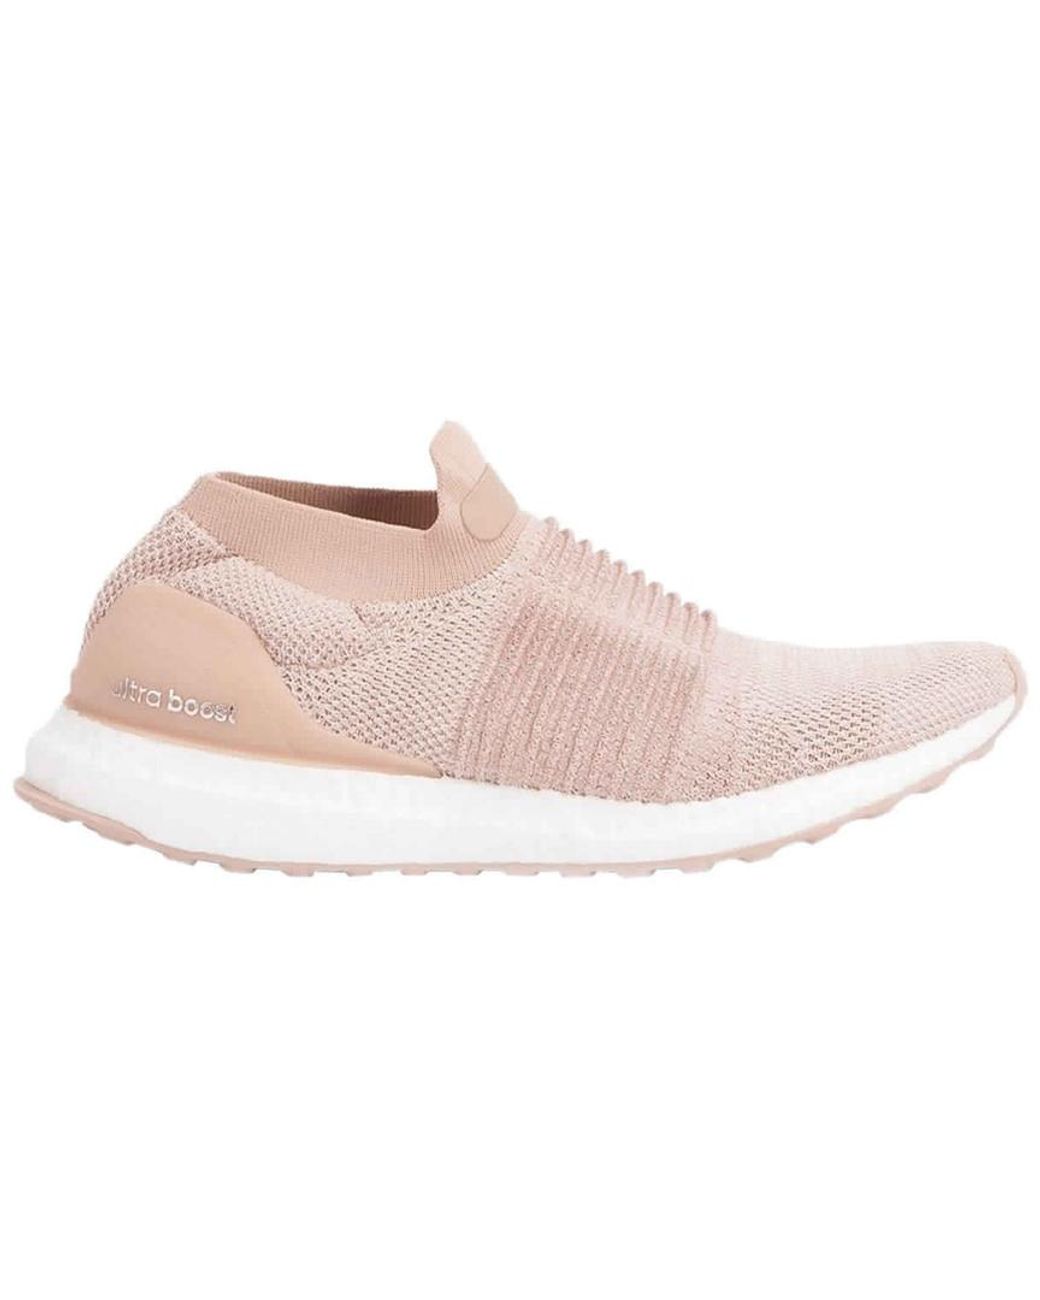 adidas Ultra Boost Laceless Running Shoes in Pink | Lyst